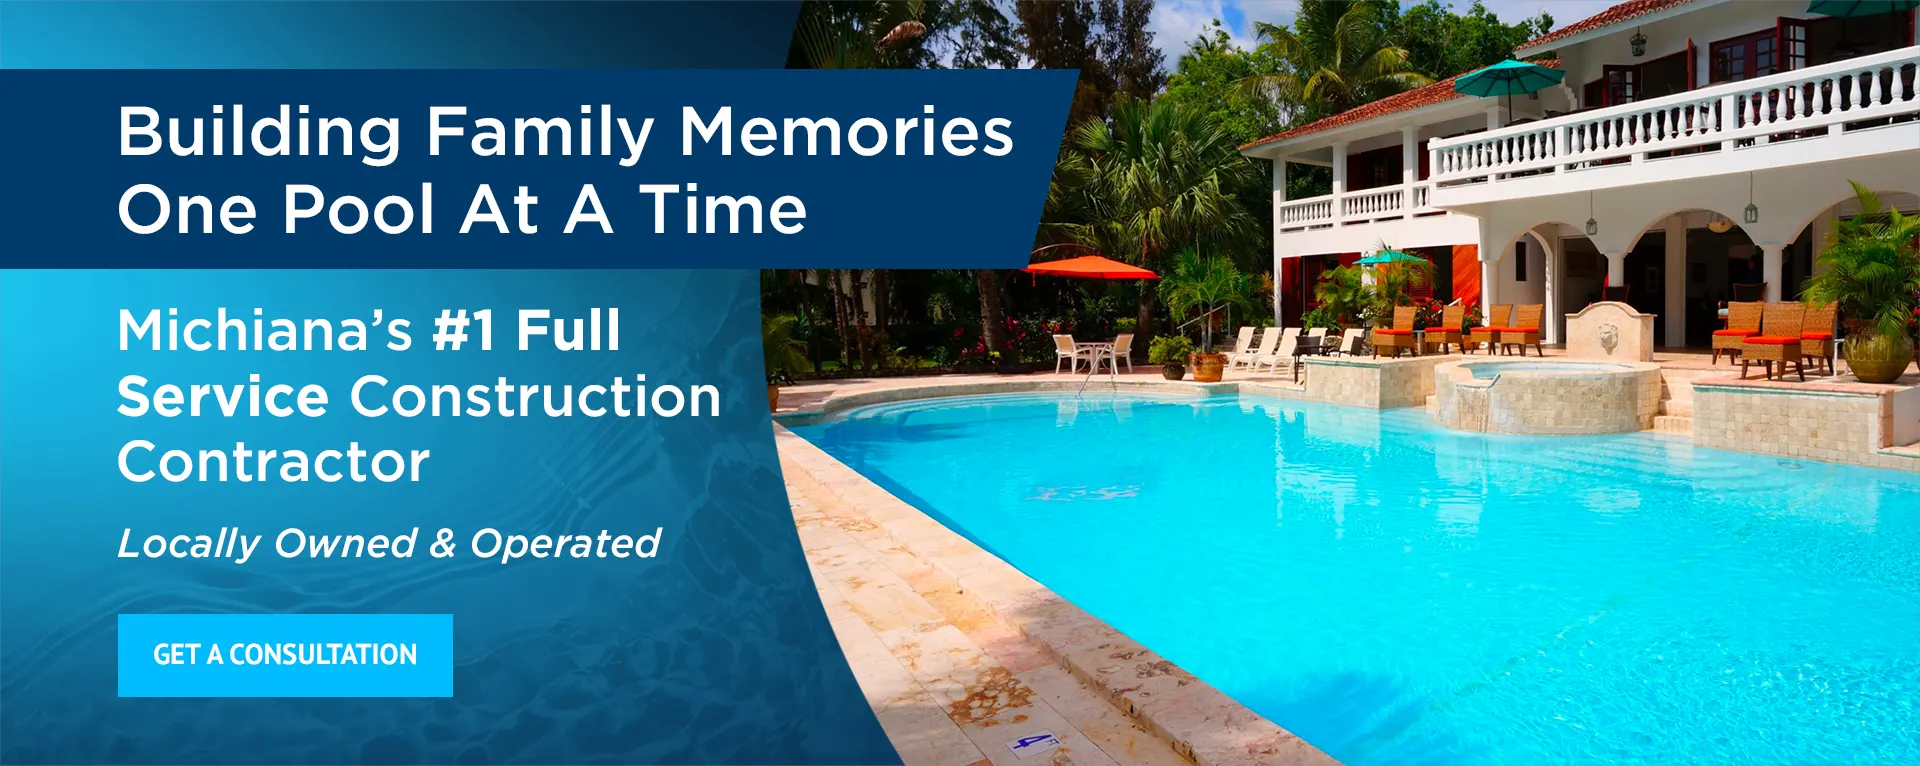 Building Family Memories One Pool At A Time